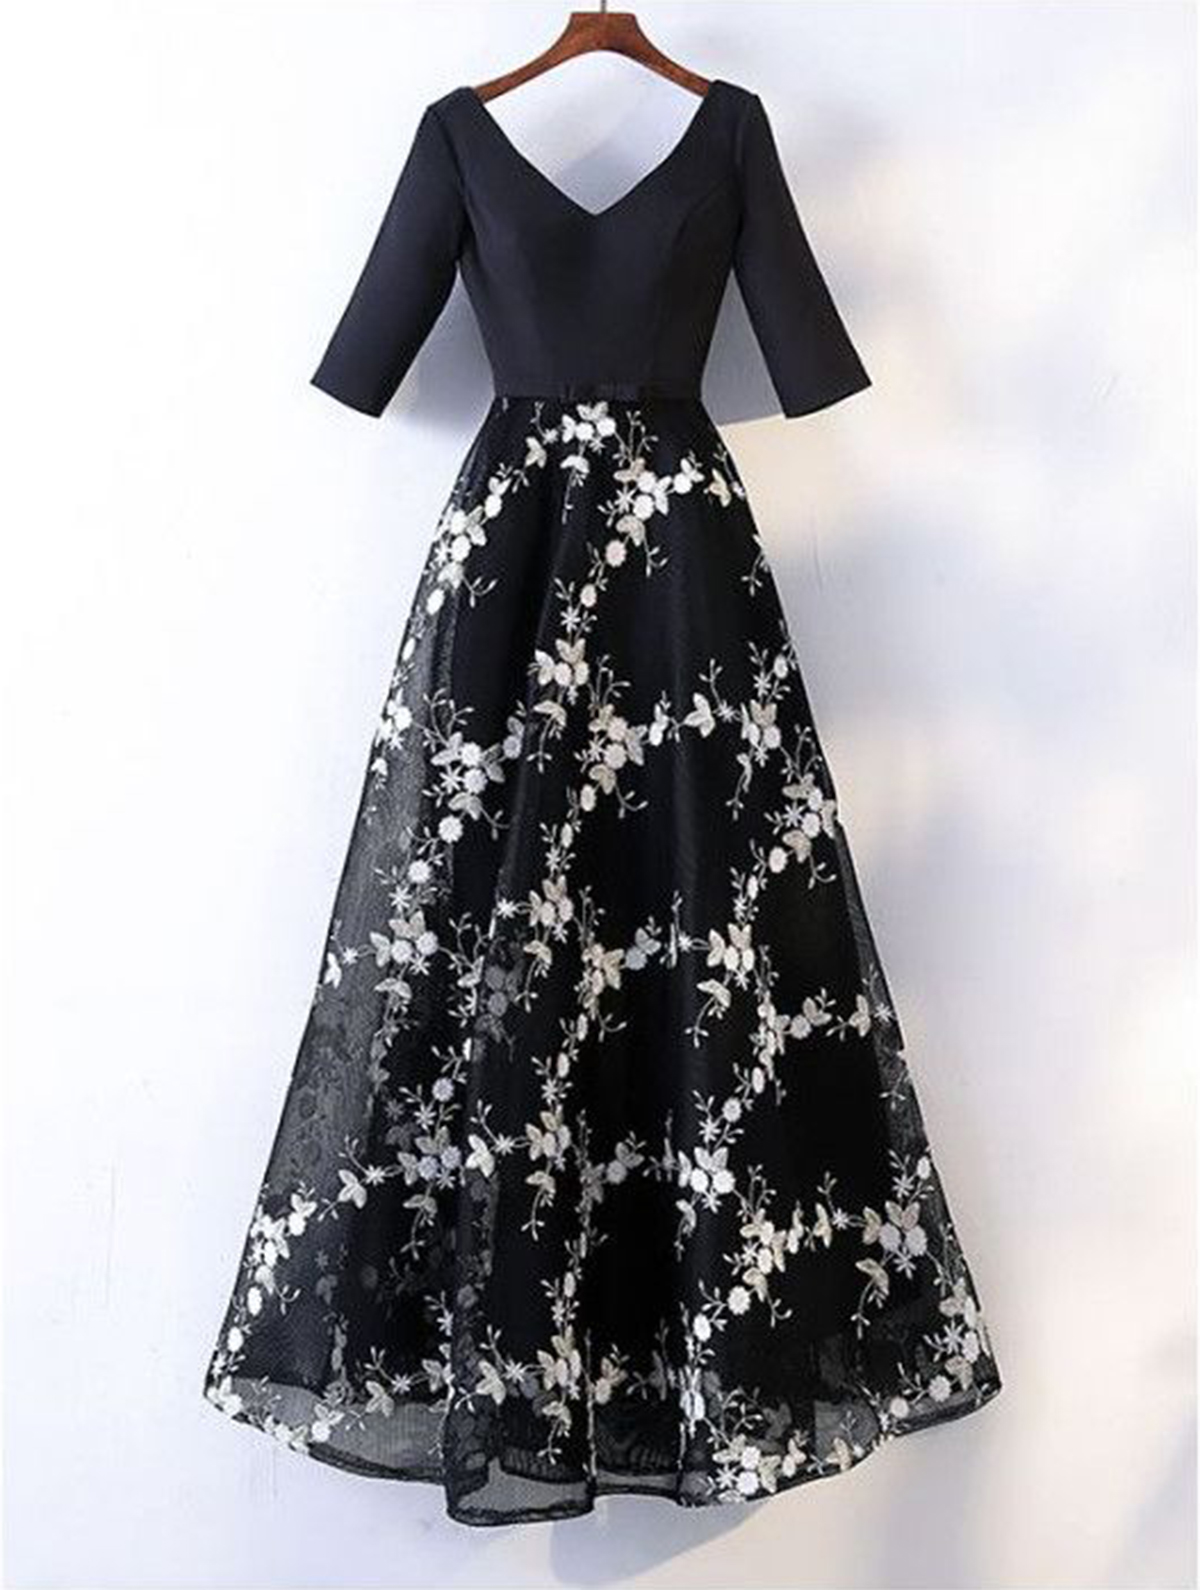 Special Black Floral Chiffon V Neck Customize Long Spring Party Dress With Sleeves,p880